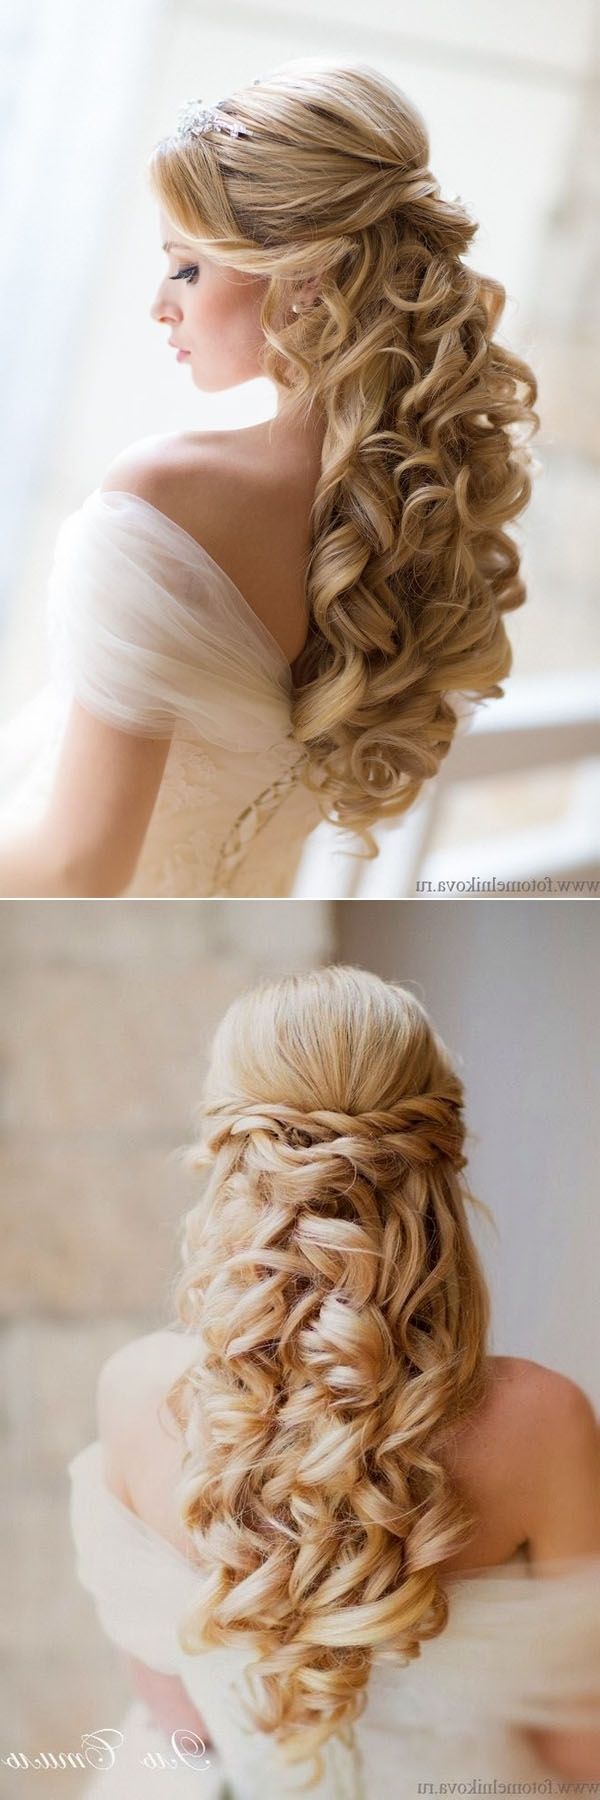 Best And Newest Wedding Hairstyles Without Curls Throughout 20 Awesome Half Up Half Down Wedding Hairstyle Ideas (View 13 of 15)